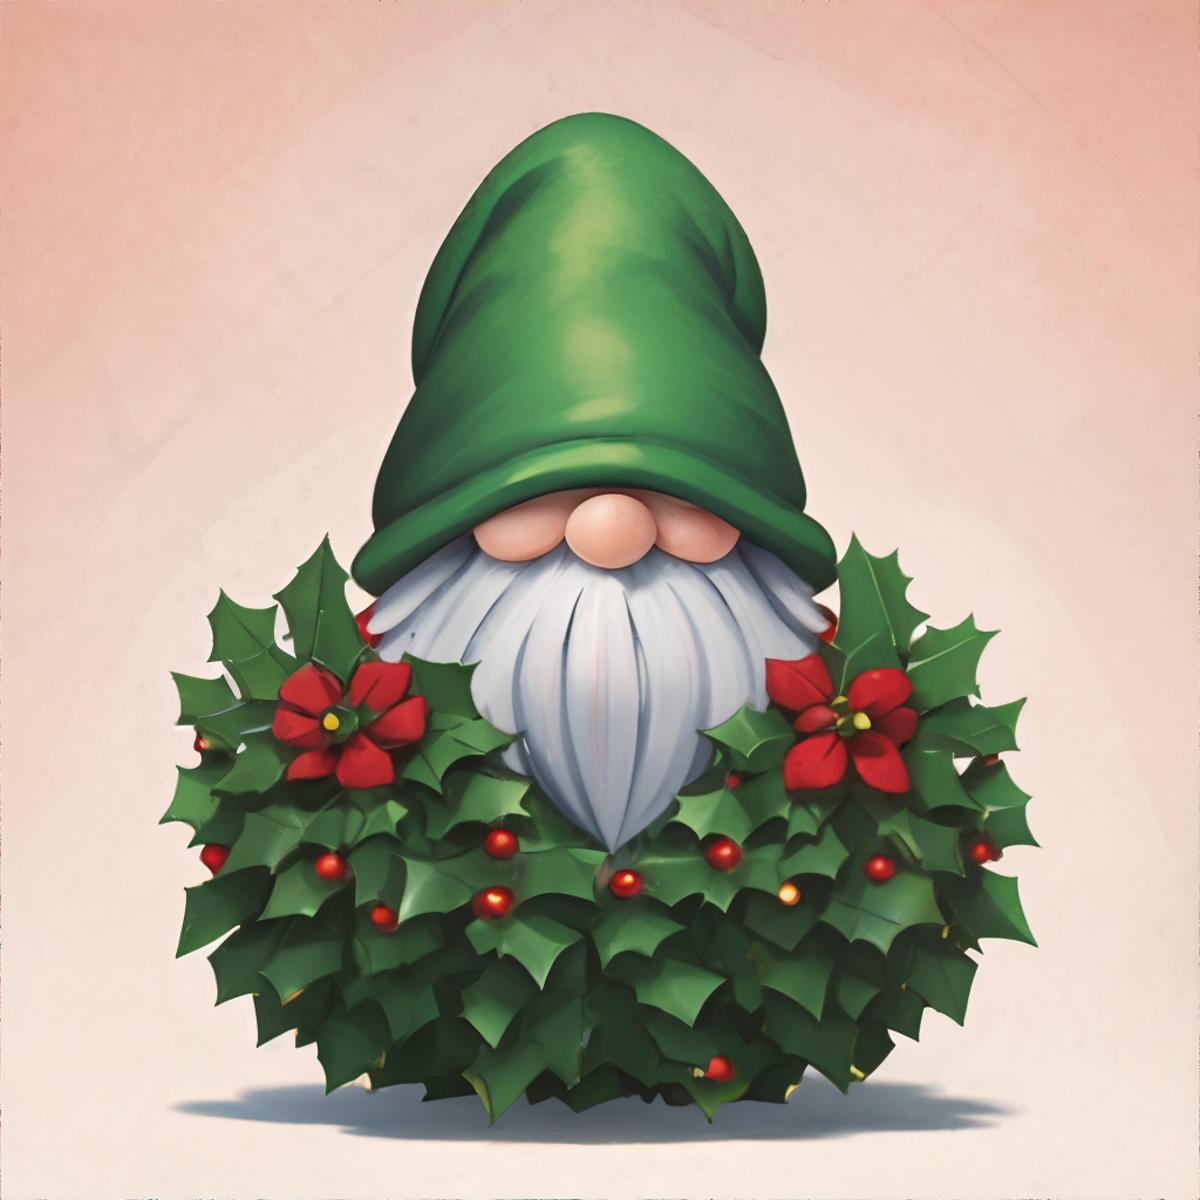 A Christmas card with a green elf wearing a green hat and green beard.